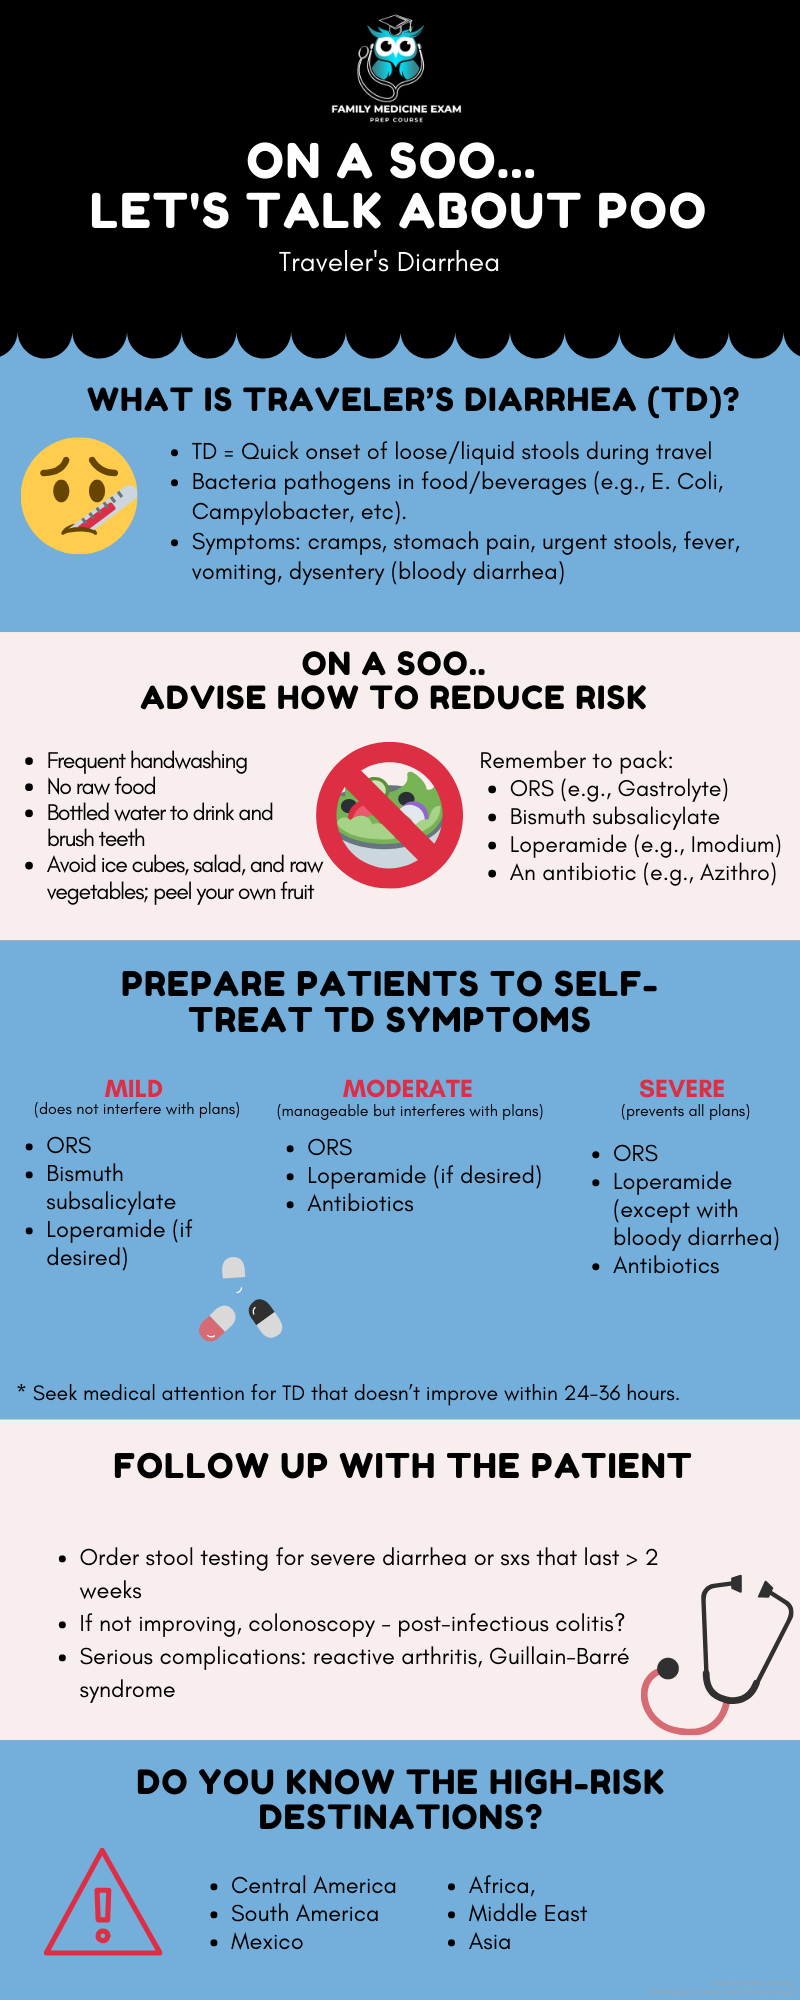 A picture of the infographic with some tips on how to treat and avoid tb.